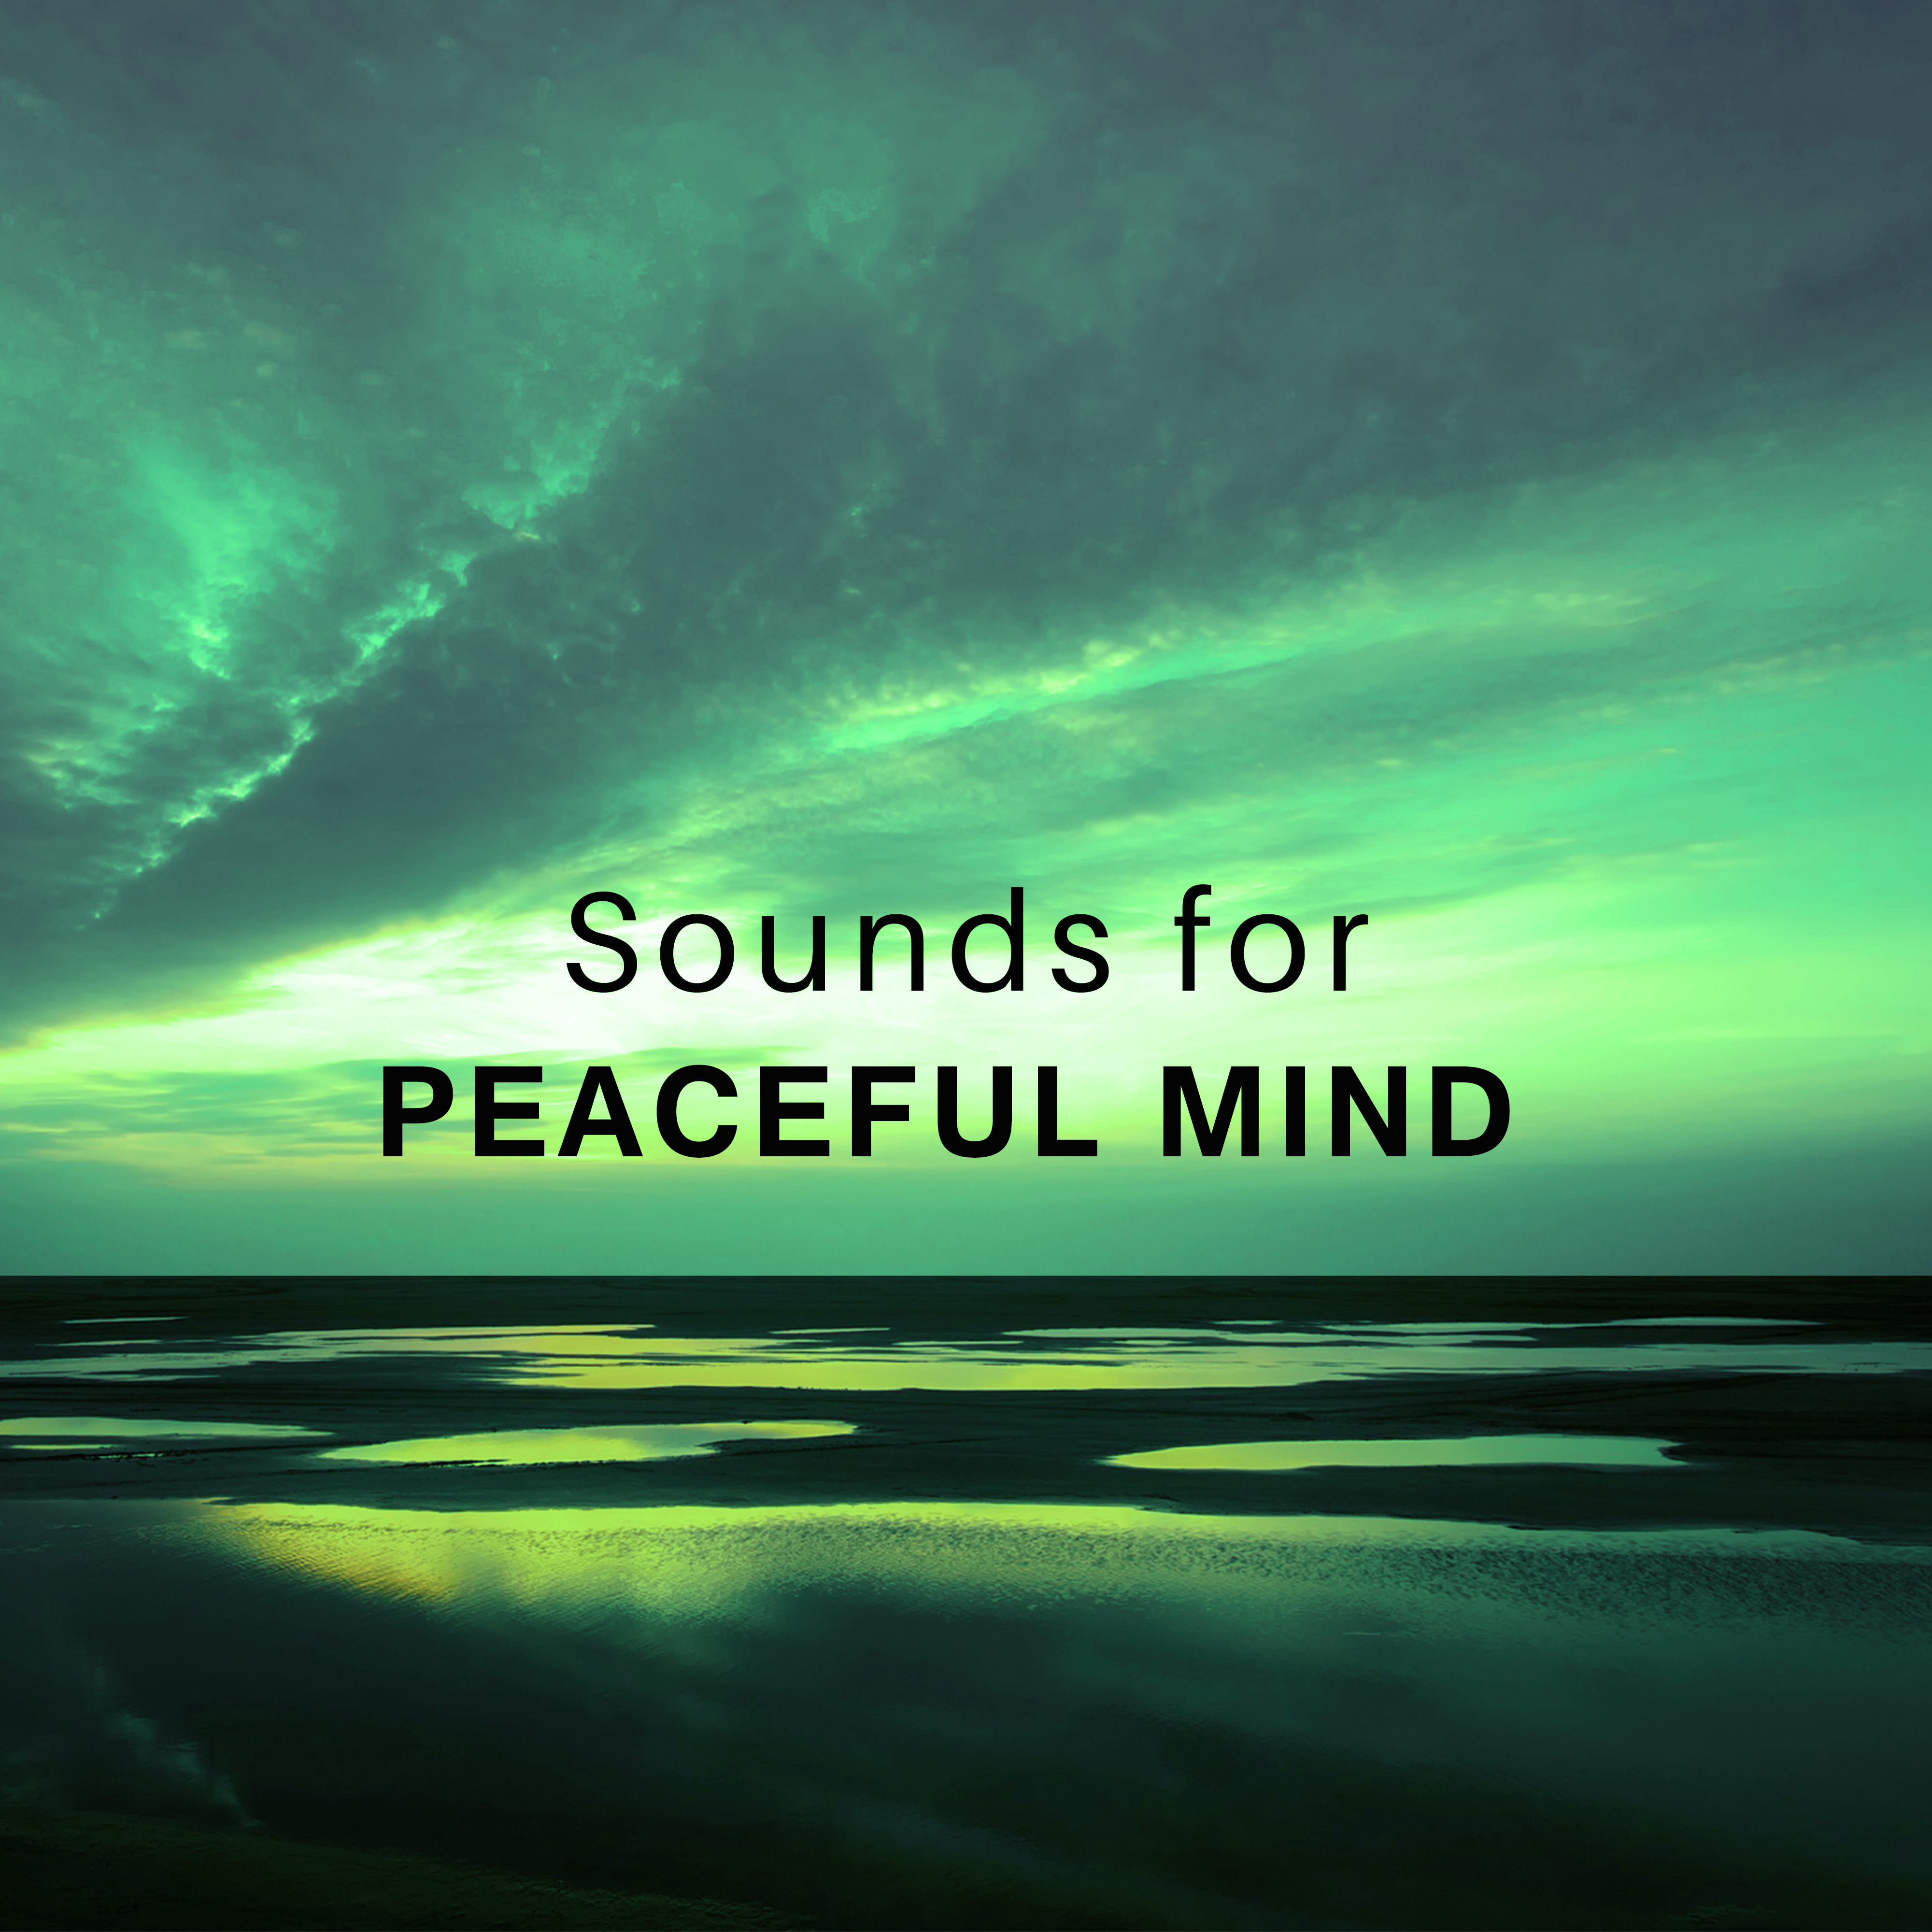 Sounds for Peaceful Mind – Easy Listening, Nature Waves, New Age Calmness, Soul Rest